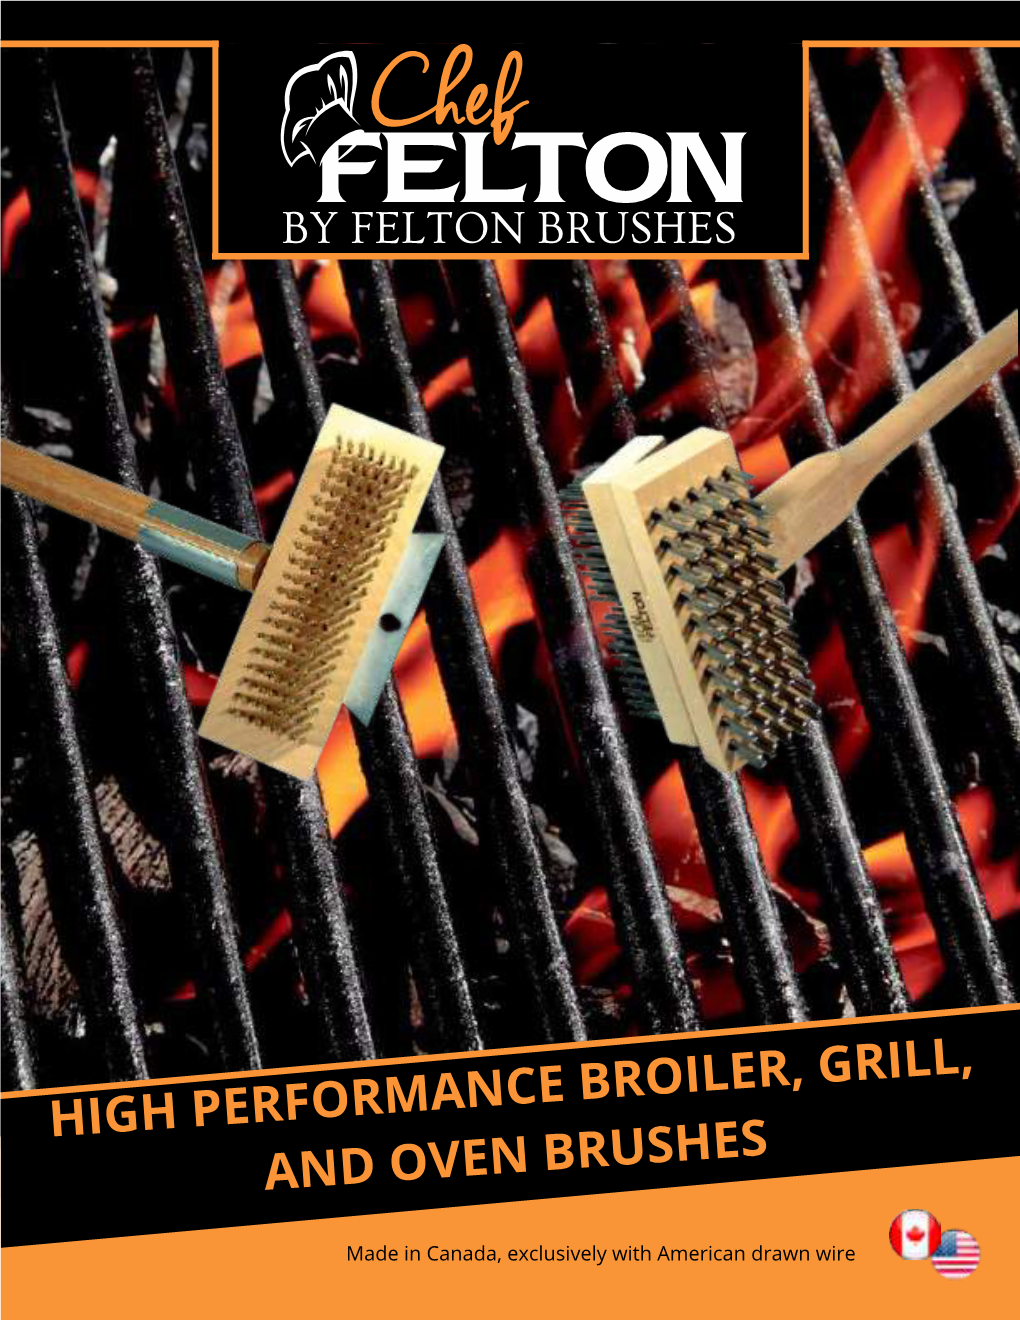 High Performance Broiler, Grill, and Oven Brushes